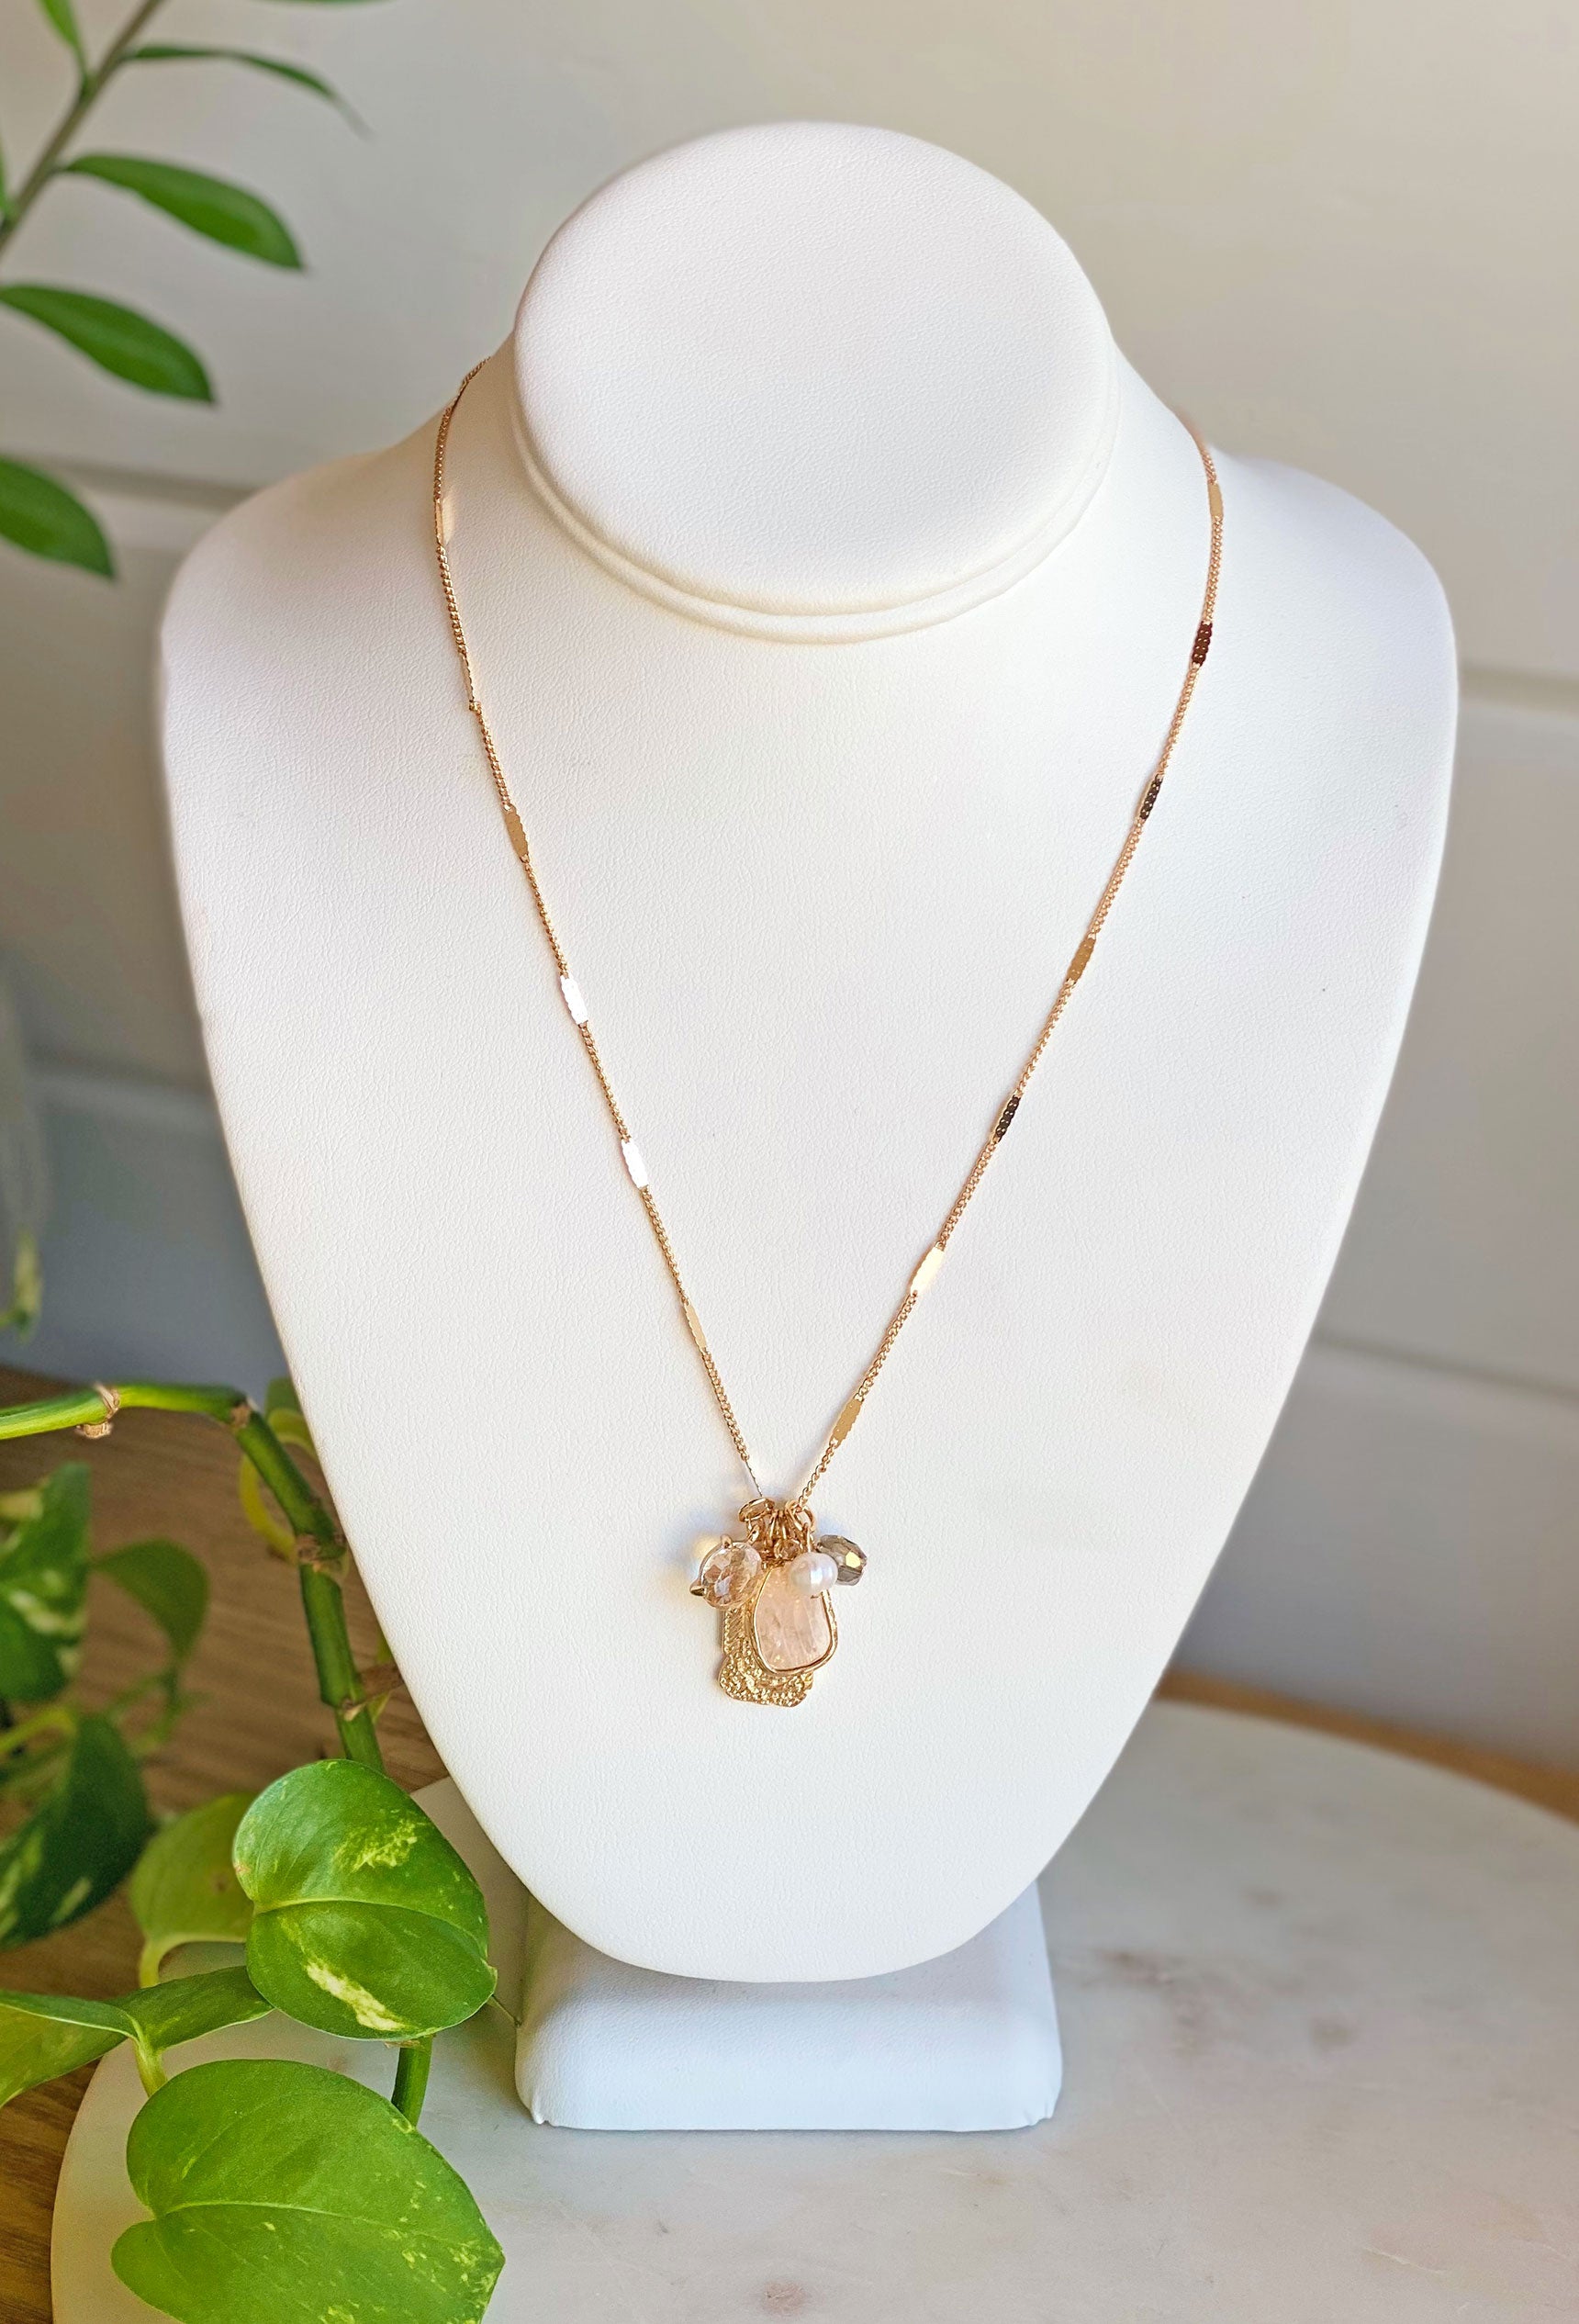 Mia Charm Necklace in Blush, charmed necklace, blush stone, dainty chain, adjustable